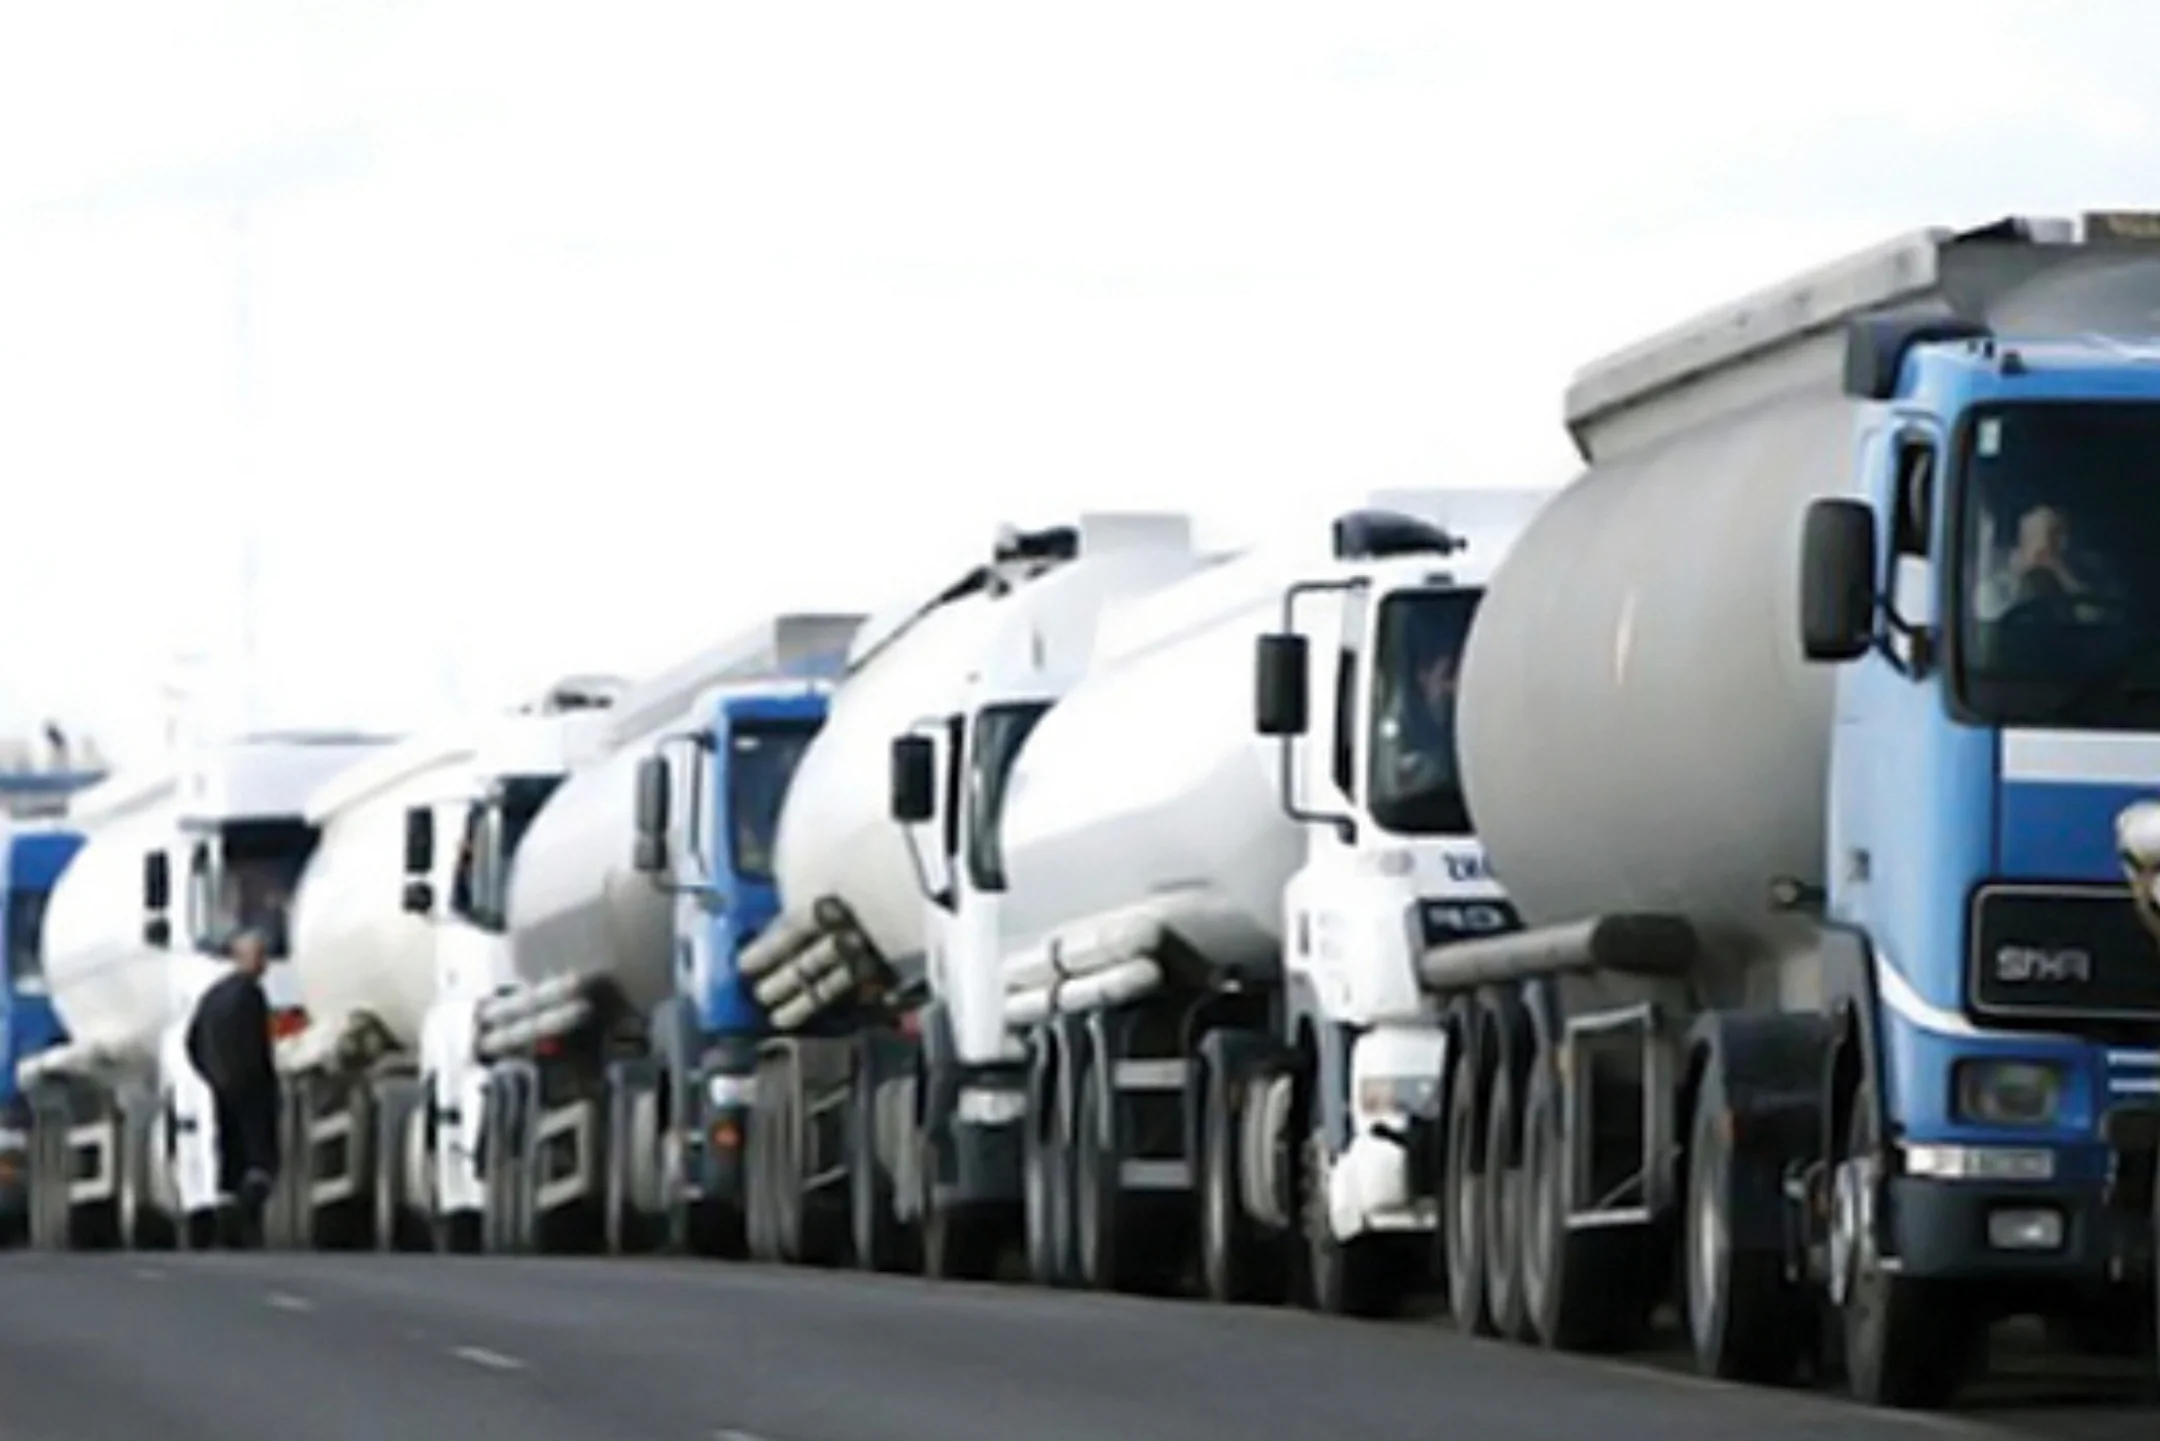 Hardship: Fuel scarcity looms as petrol tanker drivers withdraw services nationwide